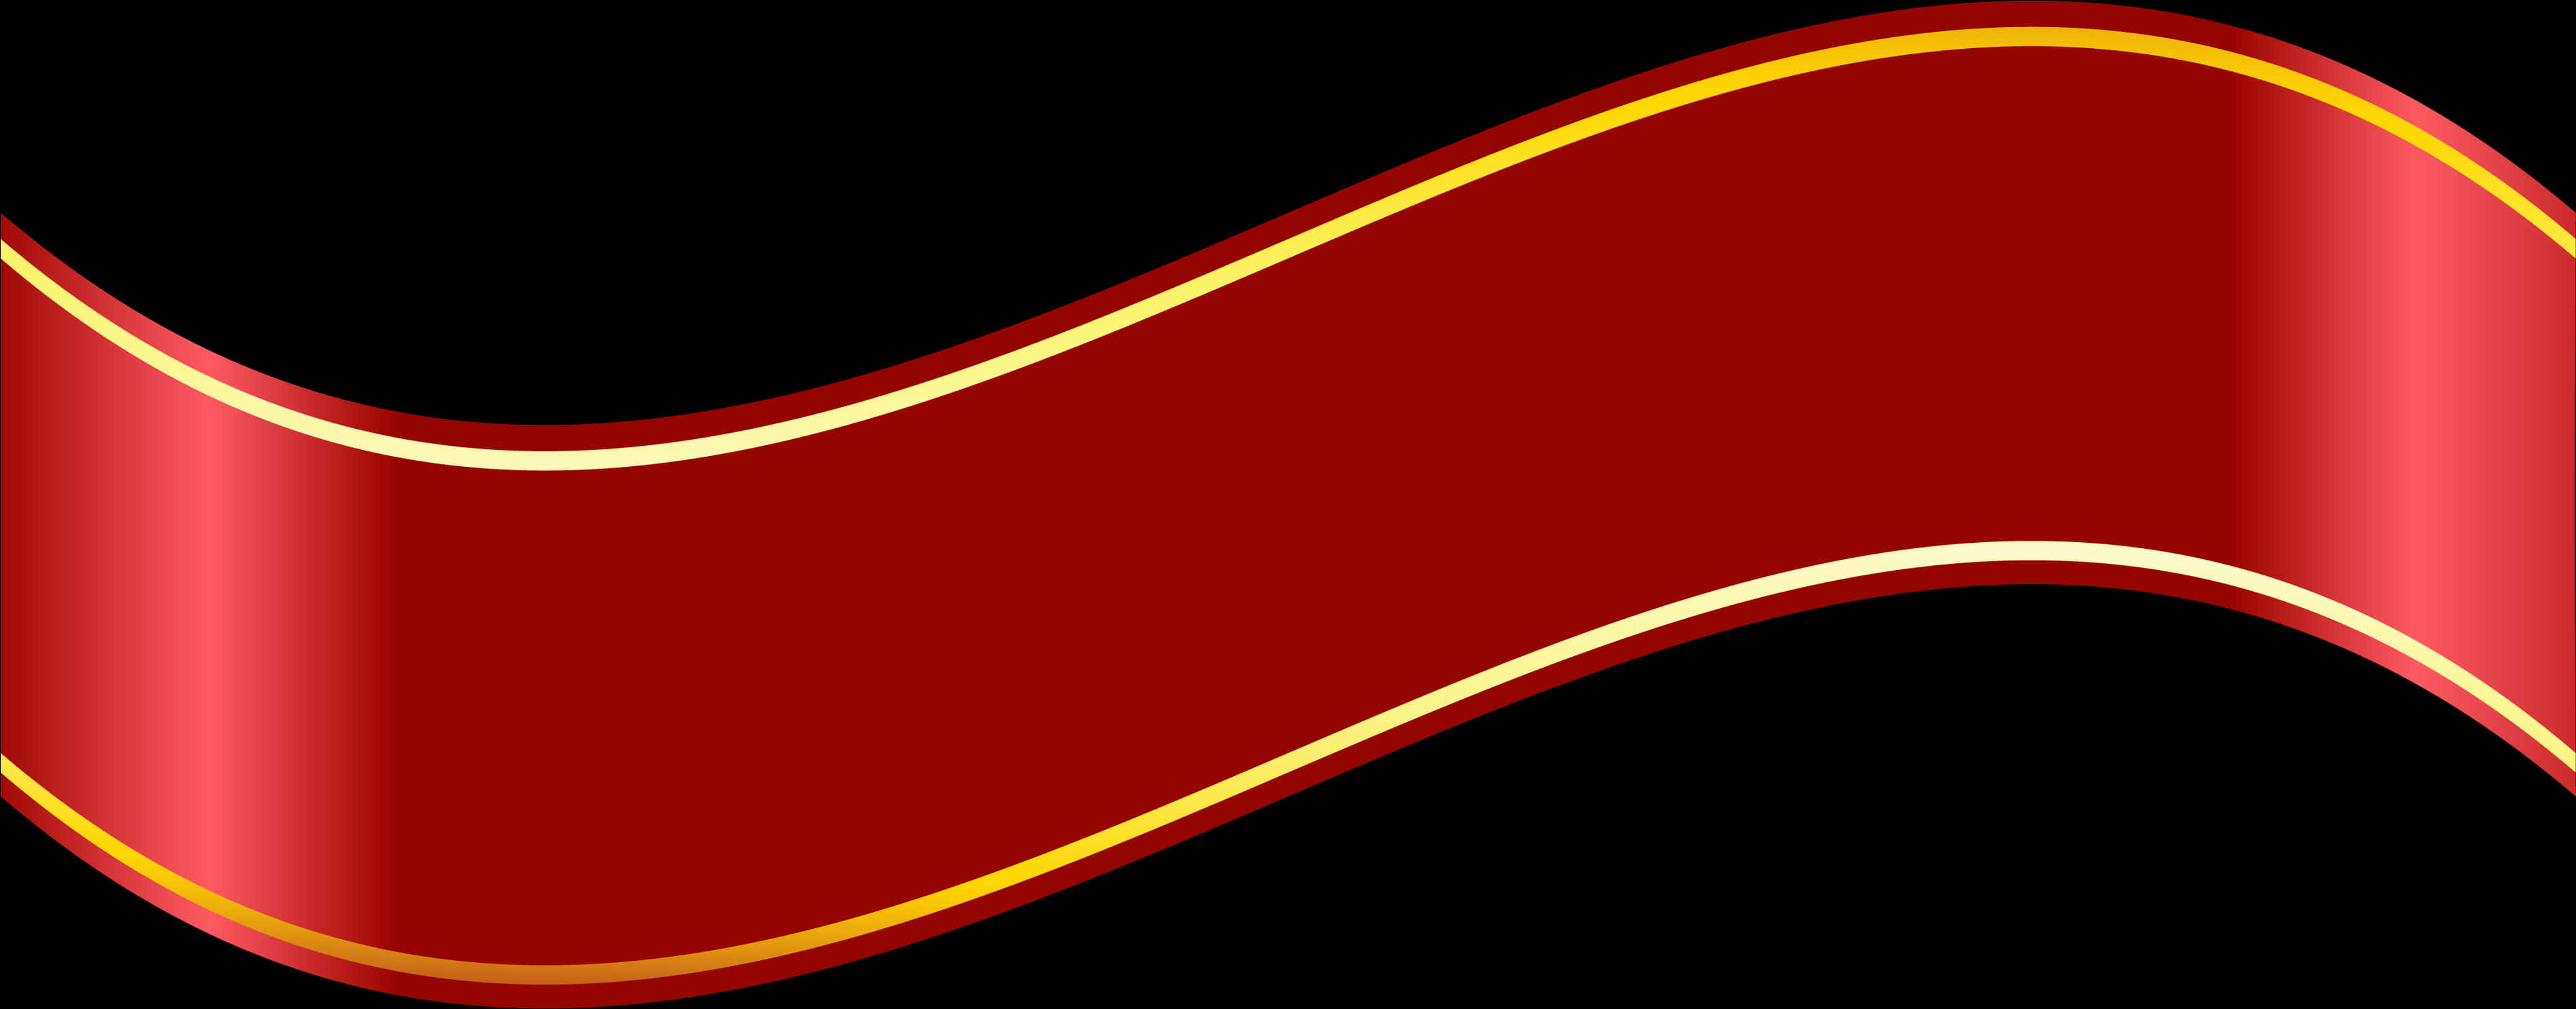 A Red And Yellow Ribbon